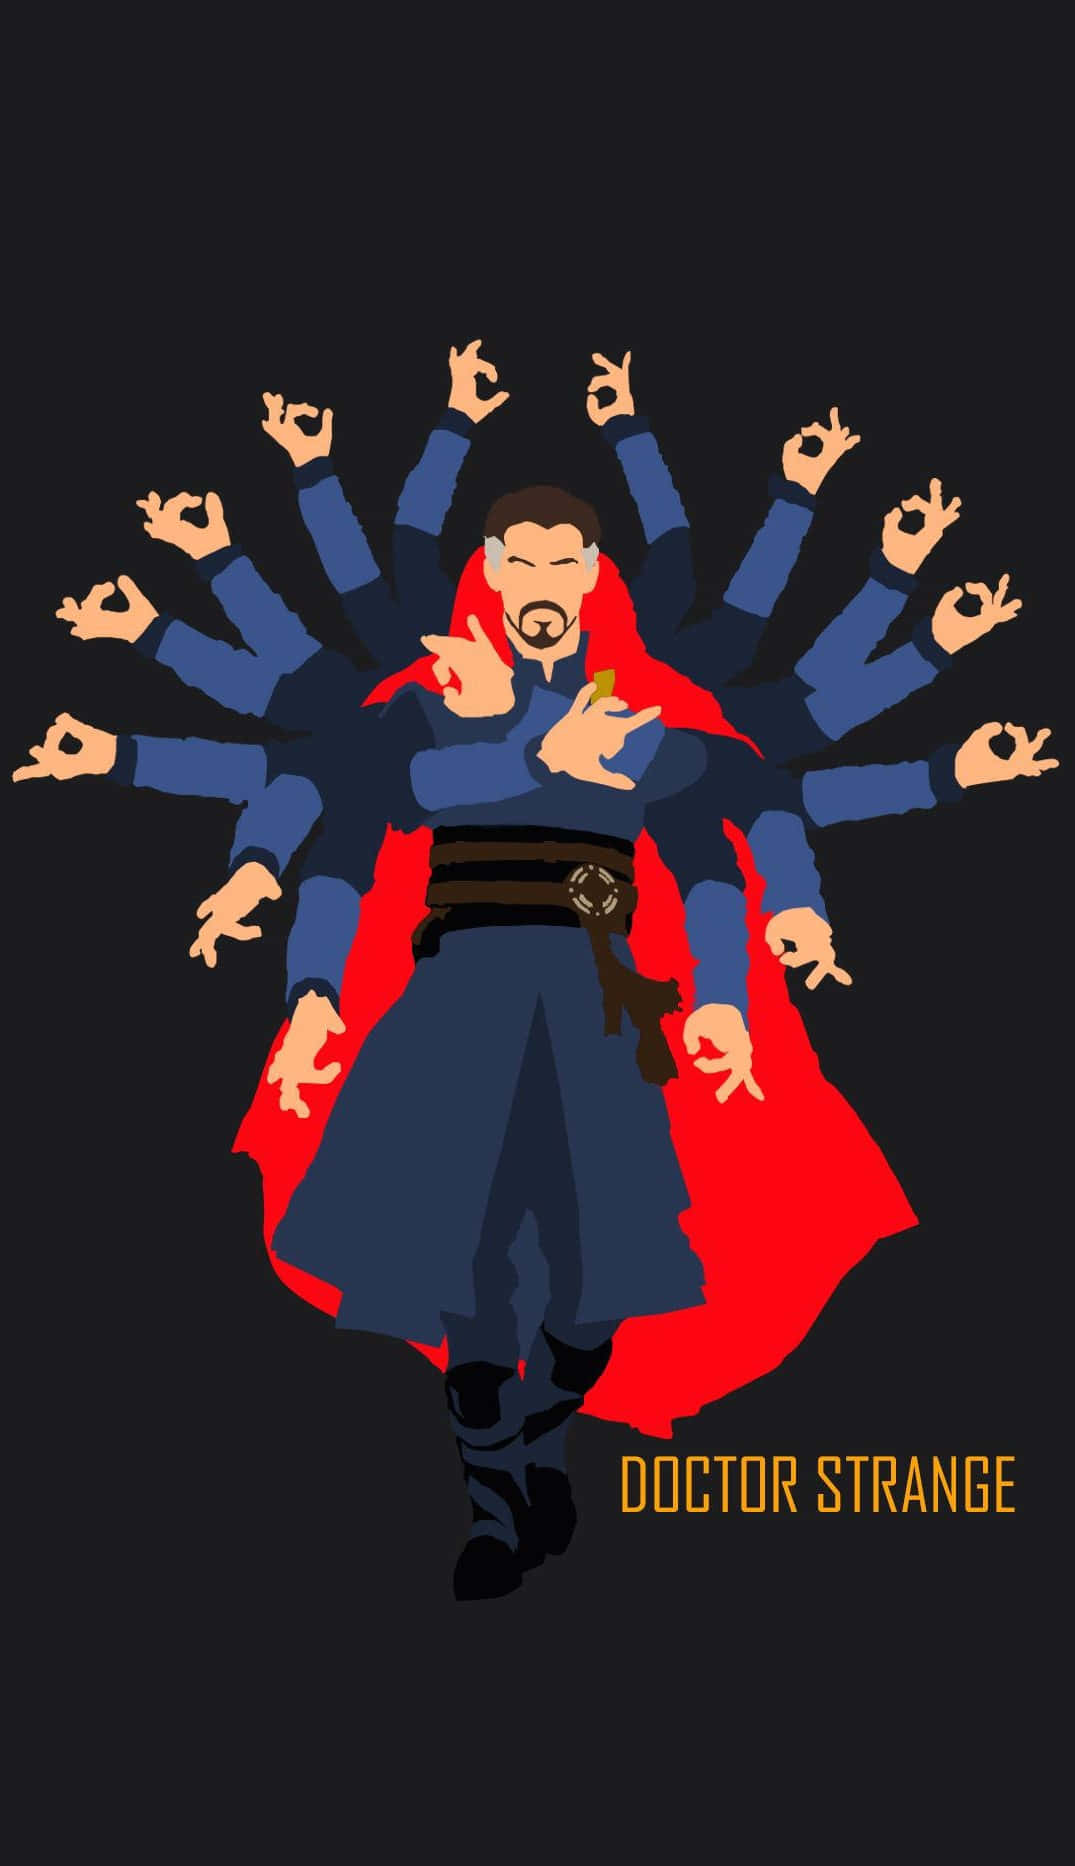 Dr Stephen Strange wields the mystic arts in a world full of surprises